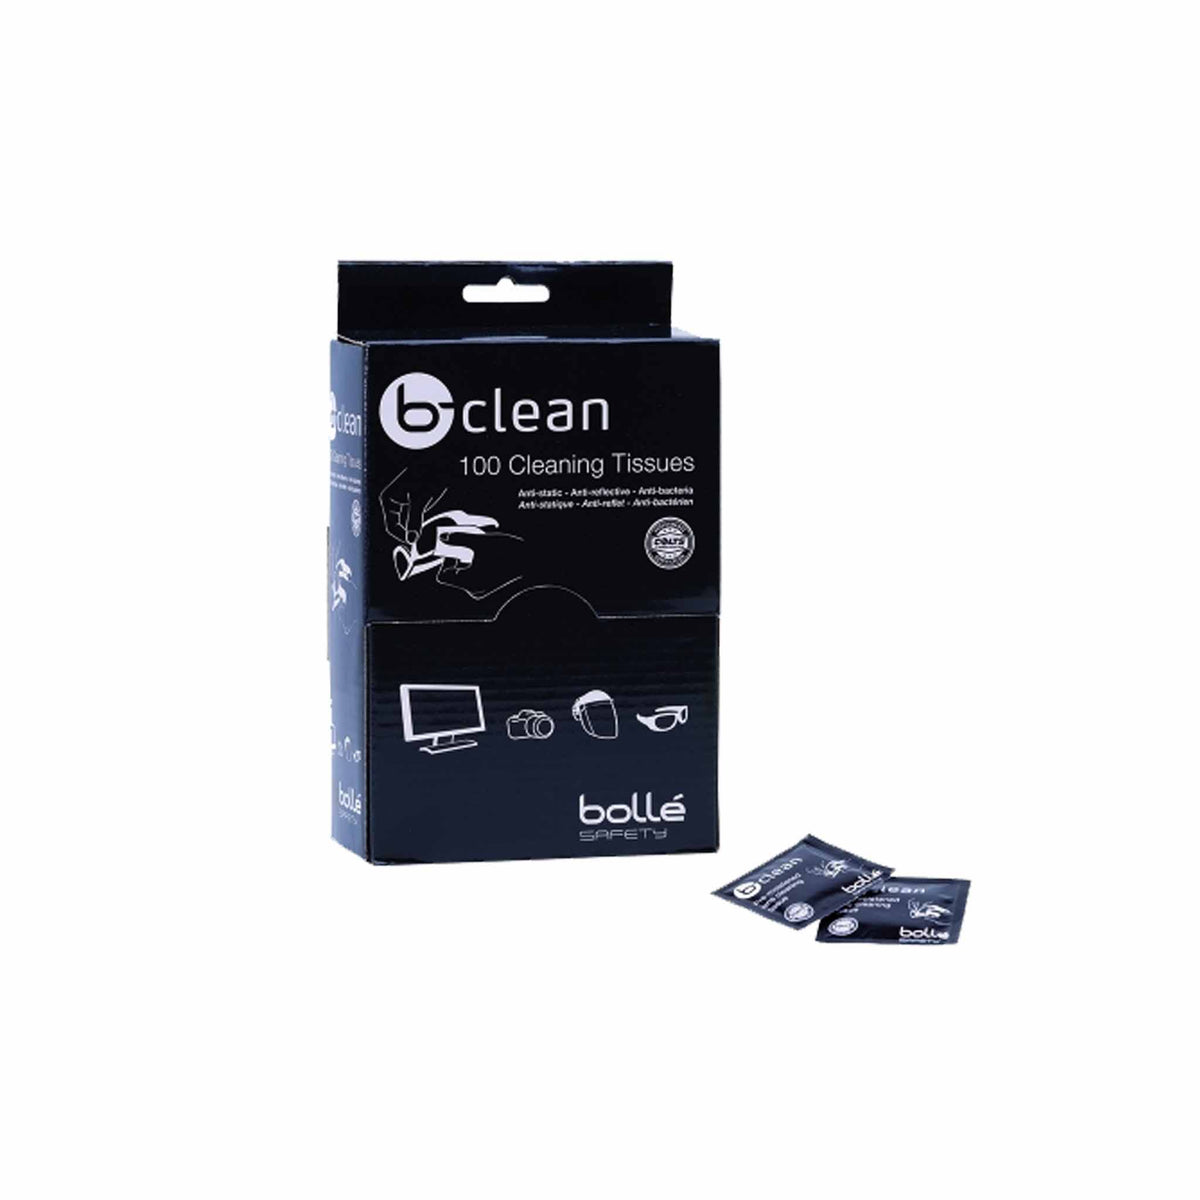 b-clean lens wipes for glasses